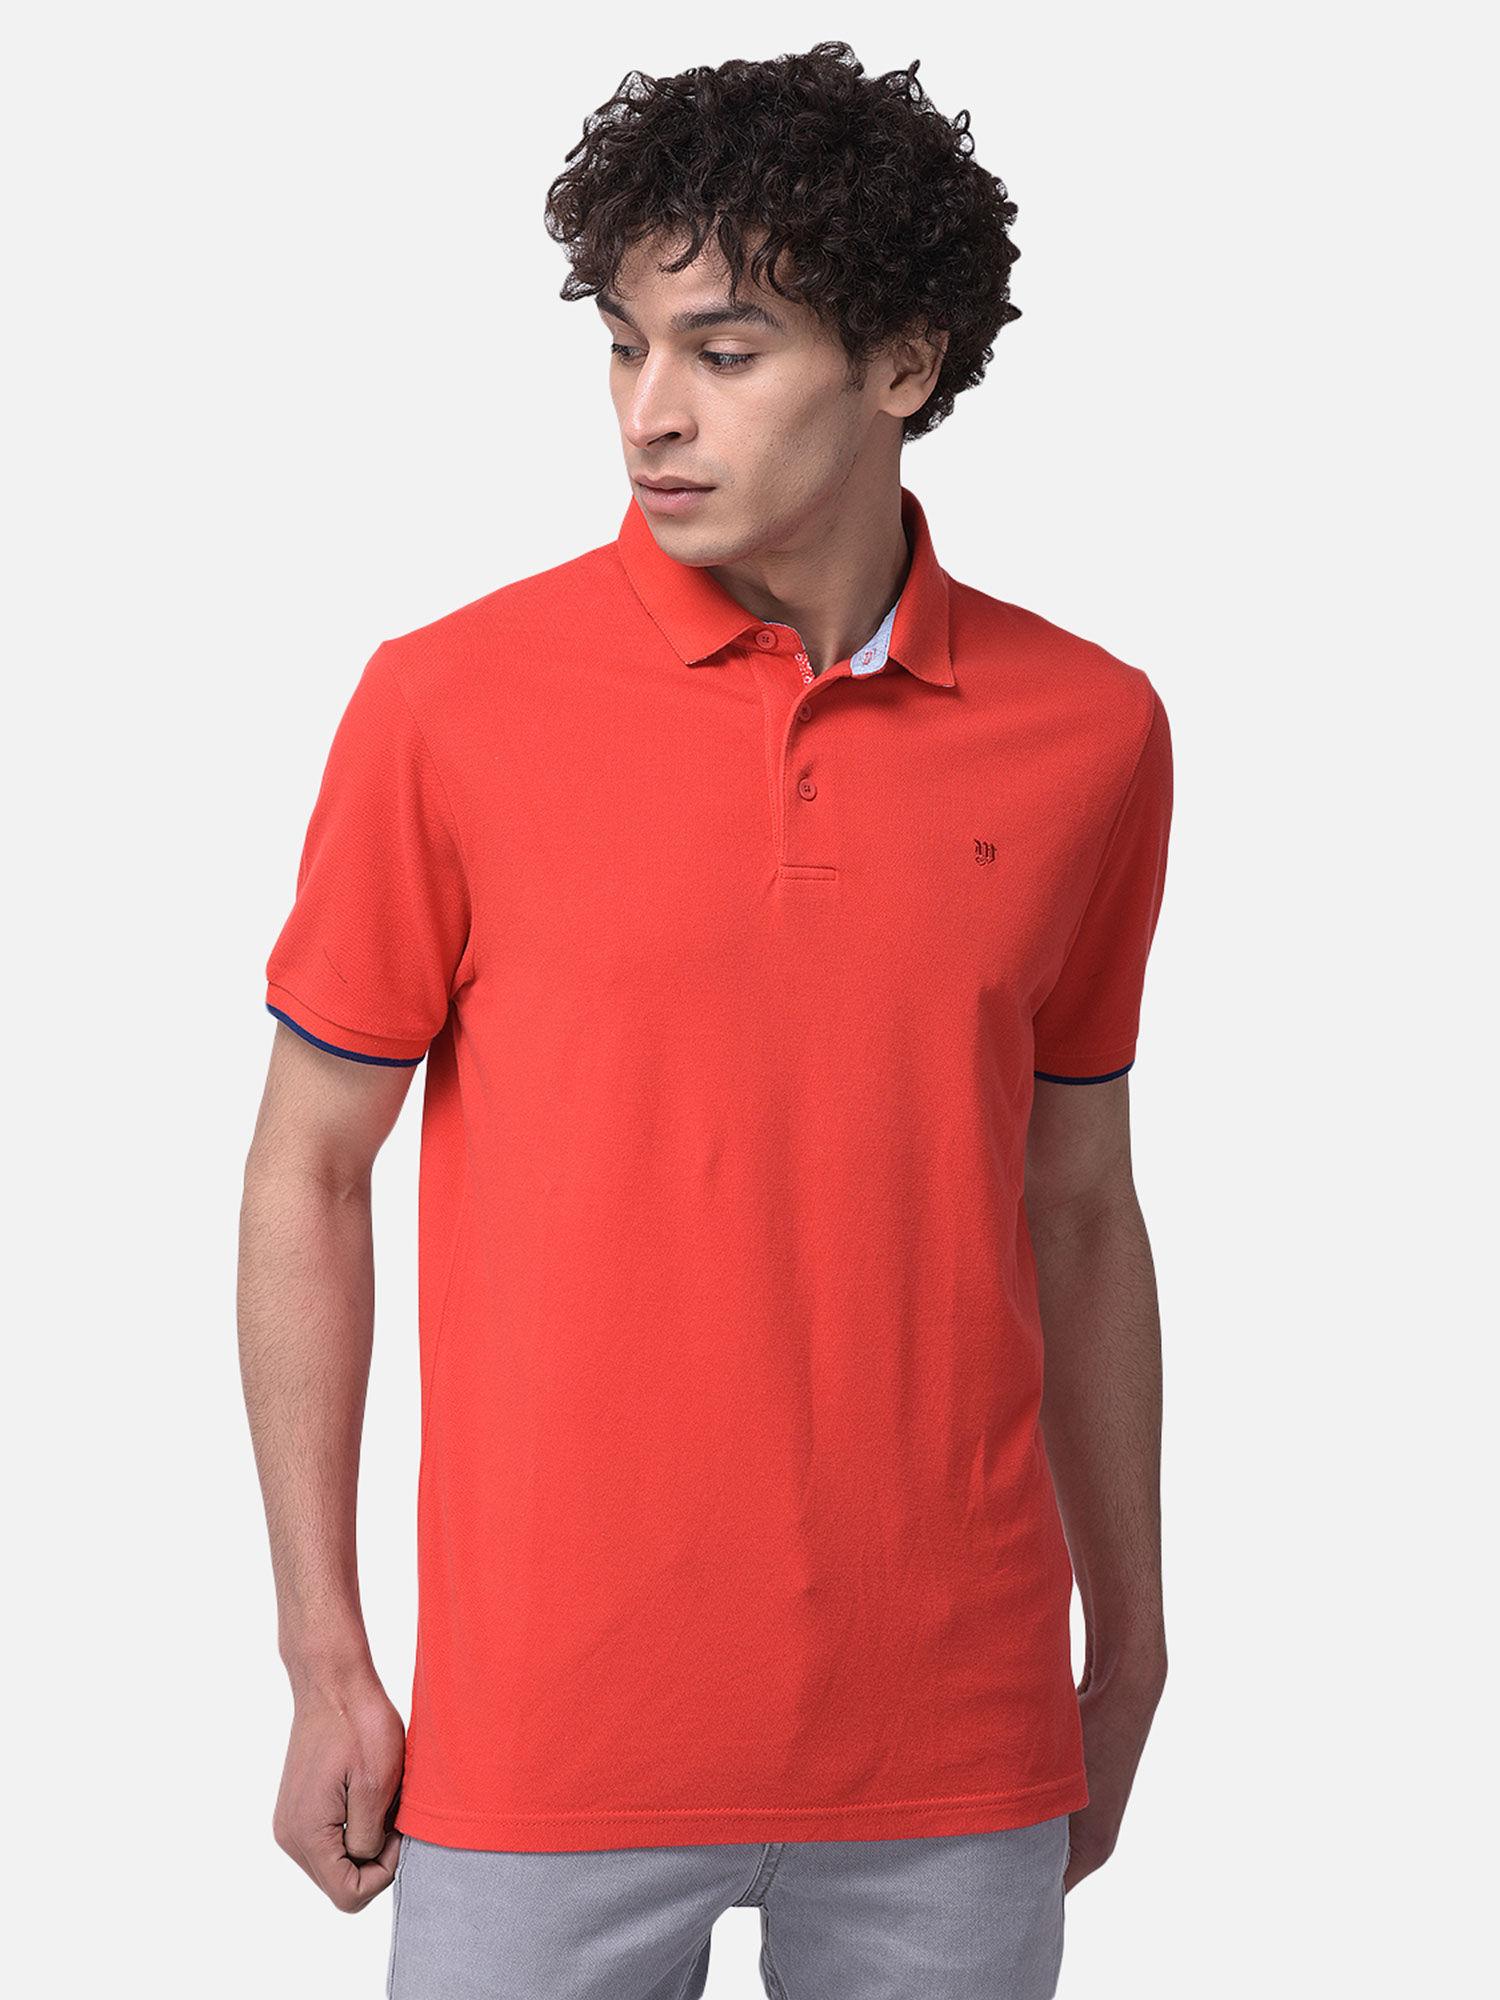 red polo t-shirt